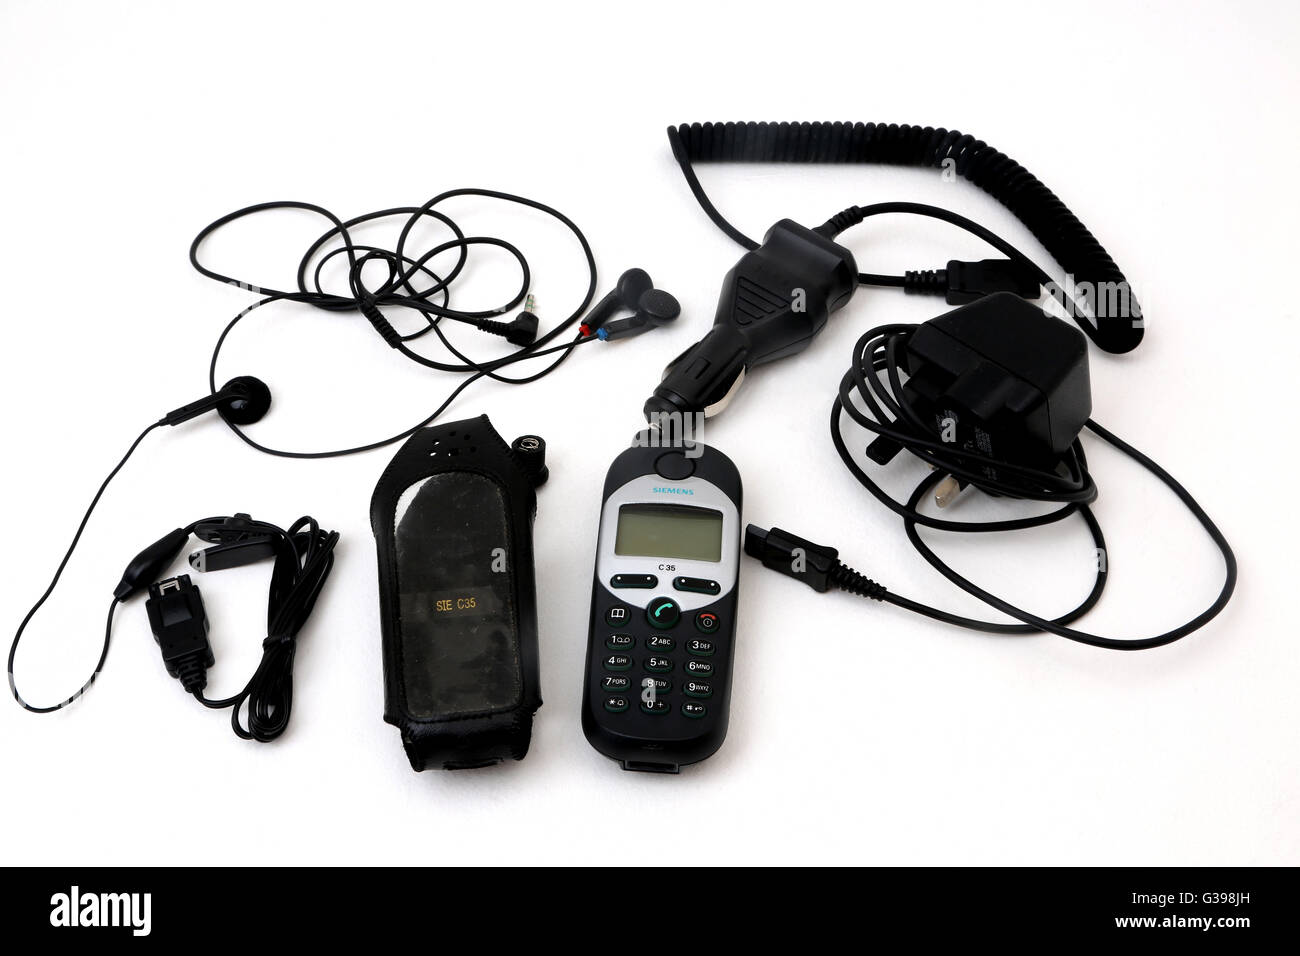 Siemens C35 Mobile Phone Package With Chargers, Case, Ear Phones And Stock  Photo - Alamy